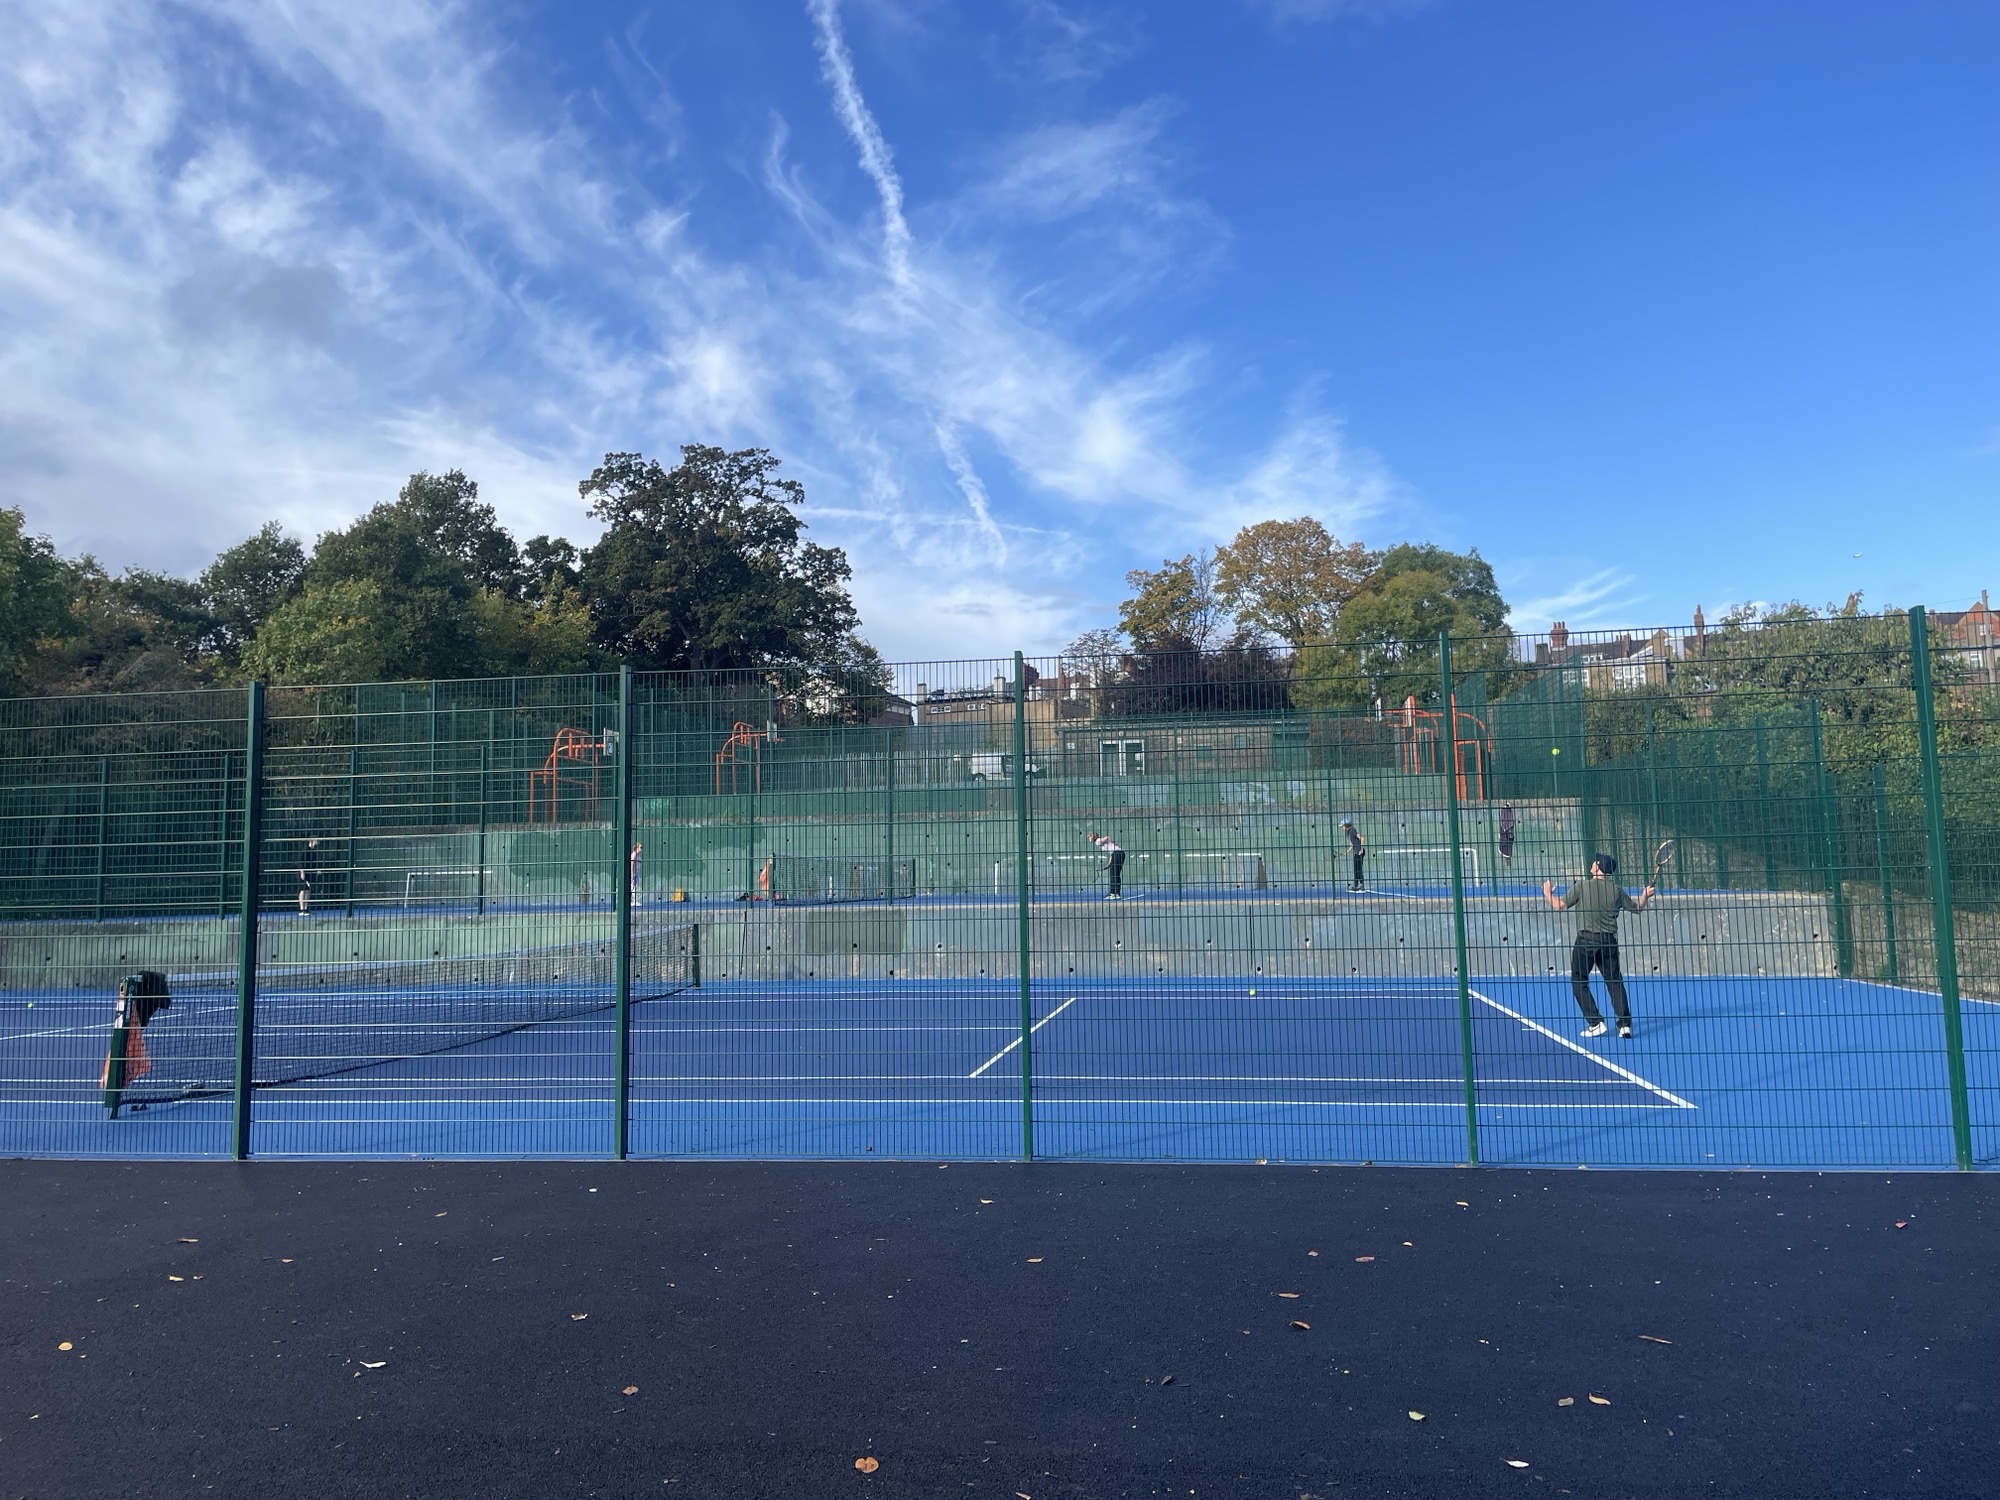 Park tennis courts in Lambeth set for renovation